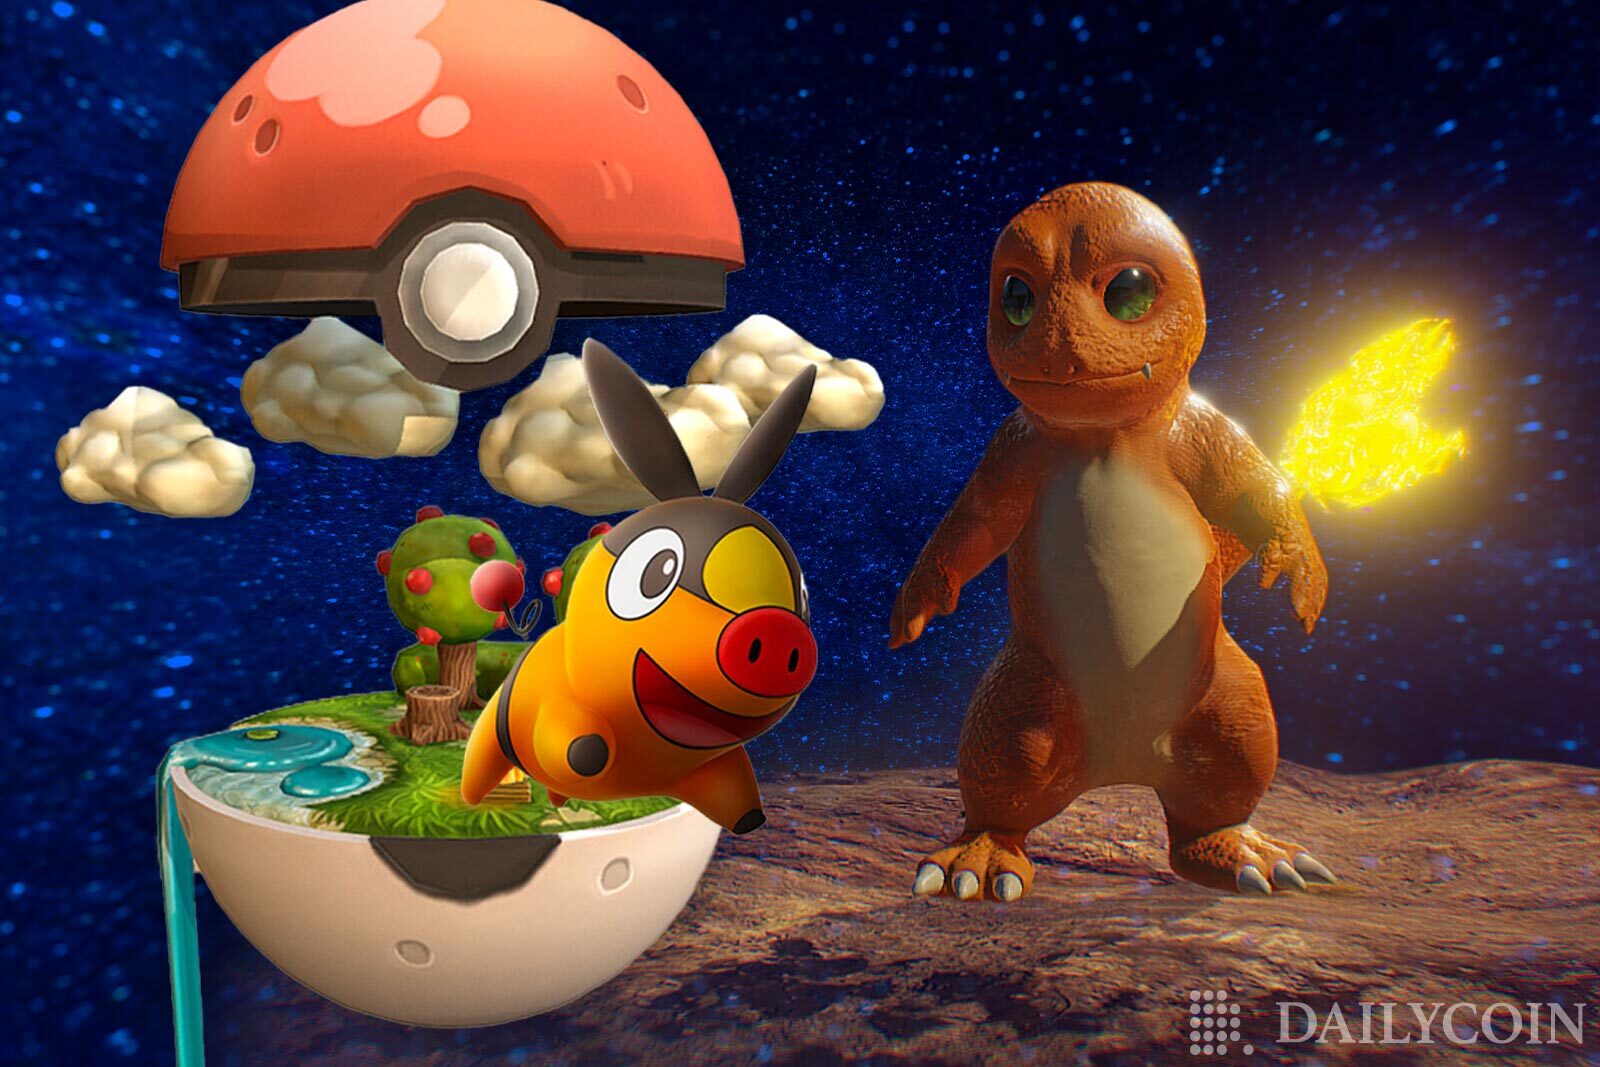 Pokemons coming out of a Pokeball on an alien planet in the outer space.